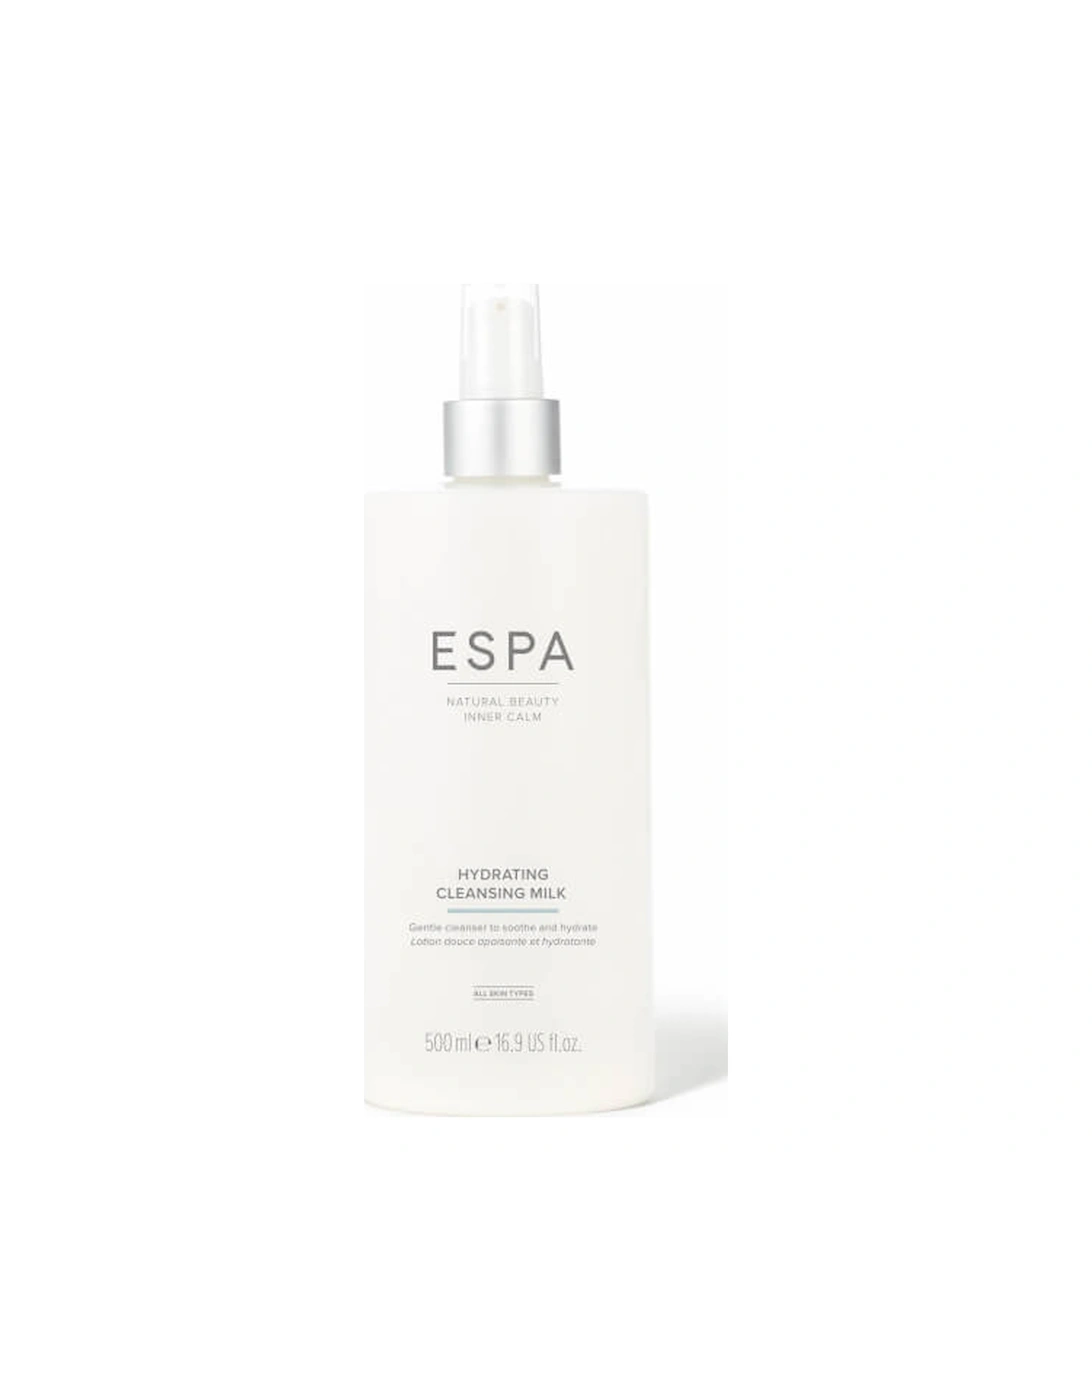 Hydrating Cleansing Milk Supersize 500ml - ESPA, 2 of 1